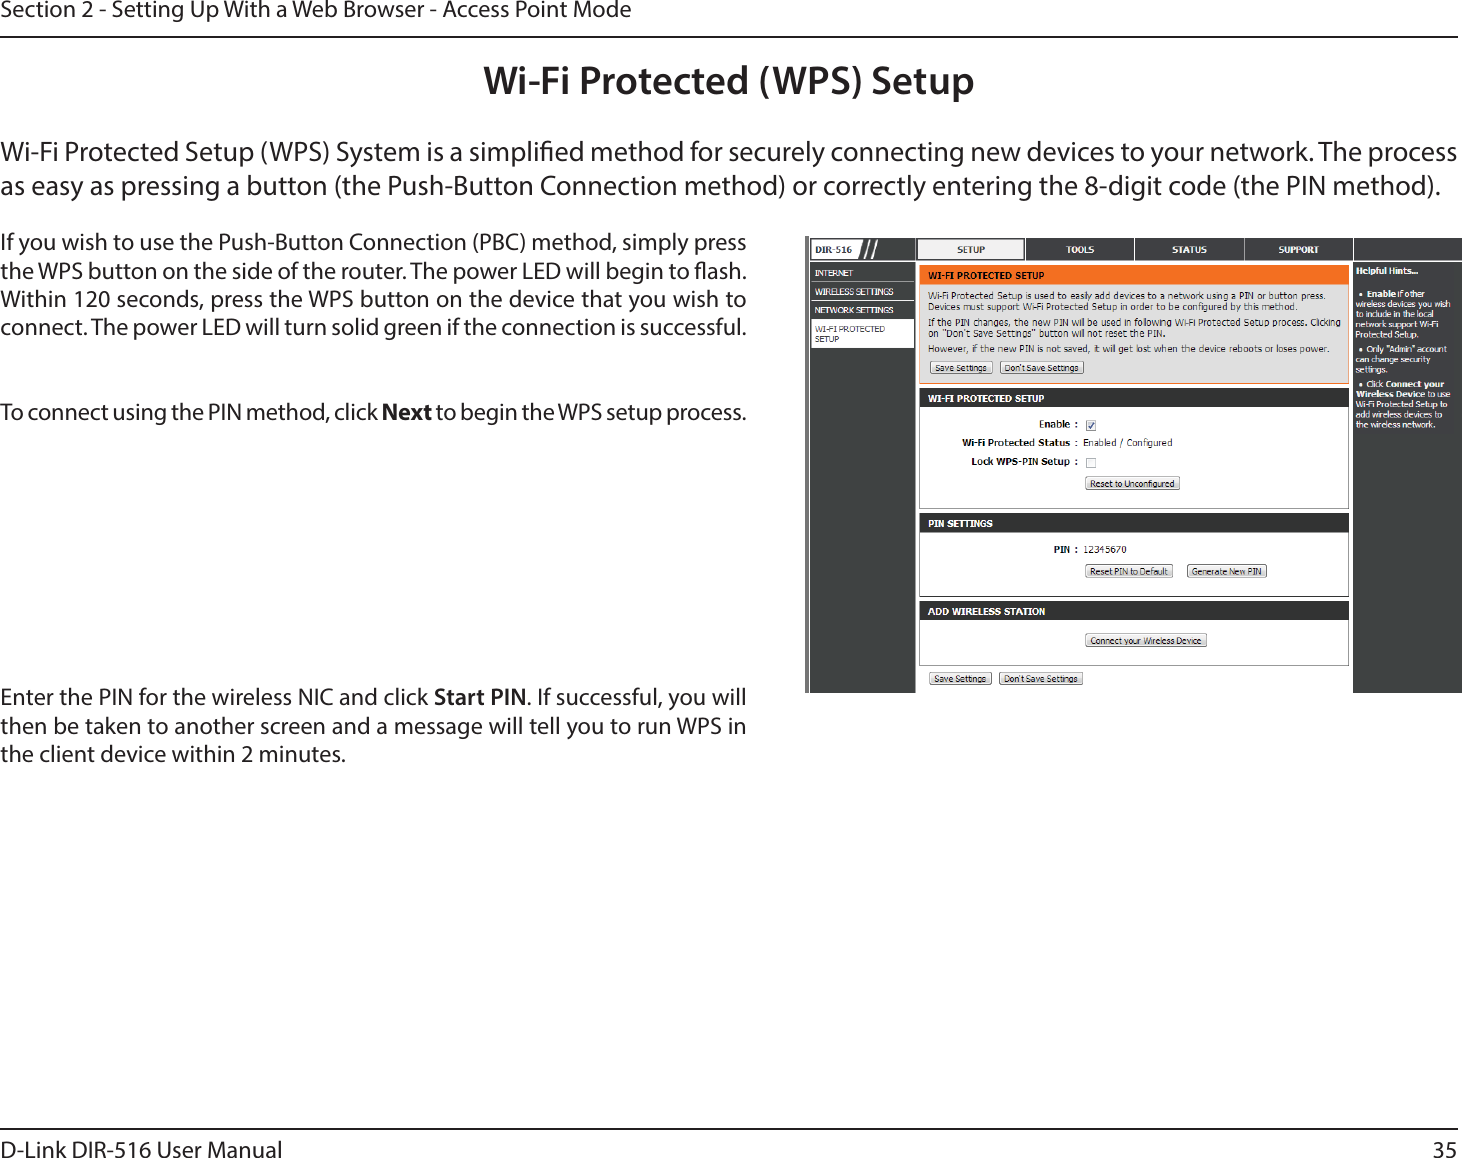 35D-Link DIR-516 User ManualSection 2 - Setting Up With a Web Browser - Access Point ModeWi-Fi Protected (WPS) SetupIf you wish to use the Push-Button Connection (PBC) method, simply press the WPS button on the side of the router. The power LED will begin to ash. Within 120 seconds, press the WPS button on the device that you wish to connect. The power LED will turn solid green if the connection is successful. To connect using the PIN method, click Next to begin the WPS setup process. Enter the PIN for the wireless NIC and click Start PIN. If successful, you will then be taken to another screen and a message will tell you to run WPS in the client device within 2 minutes.Wi-Fi Protected Setup (WPS) System is a simplied method for securely connecting new devices to your network. The process as easy as pressing a button (the Push-Button Connection method) or correctly entering the 8-digit code (the PIN method).